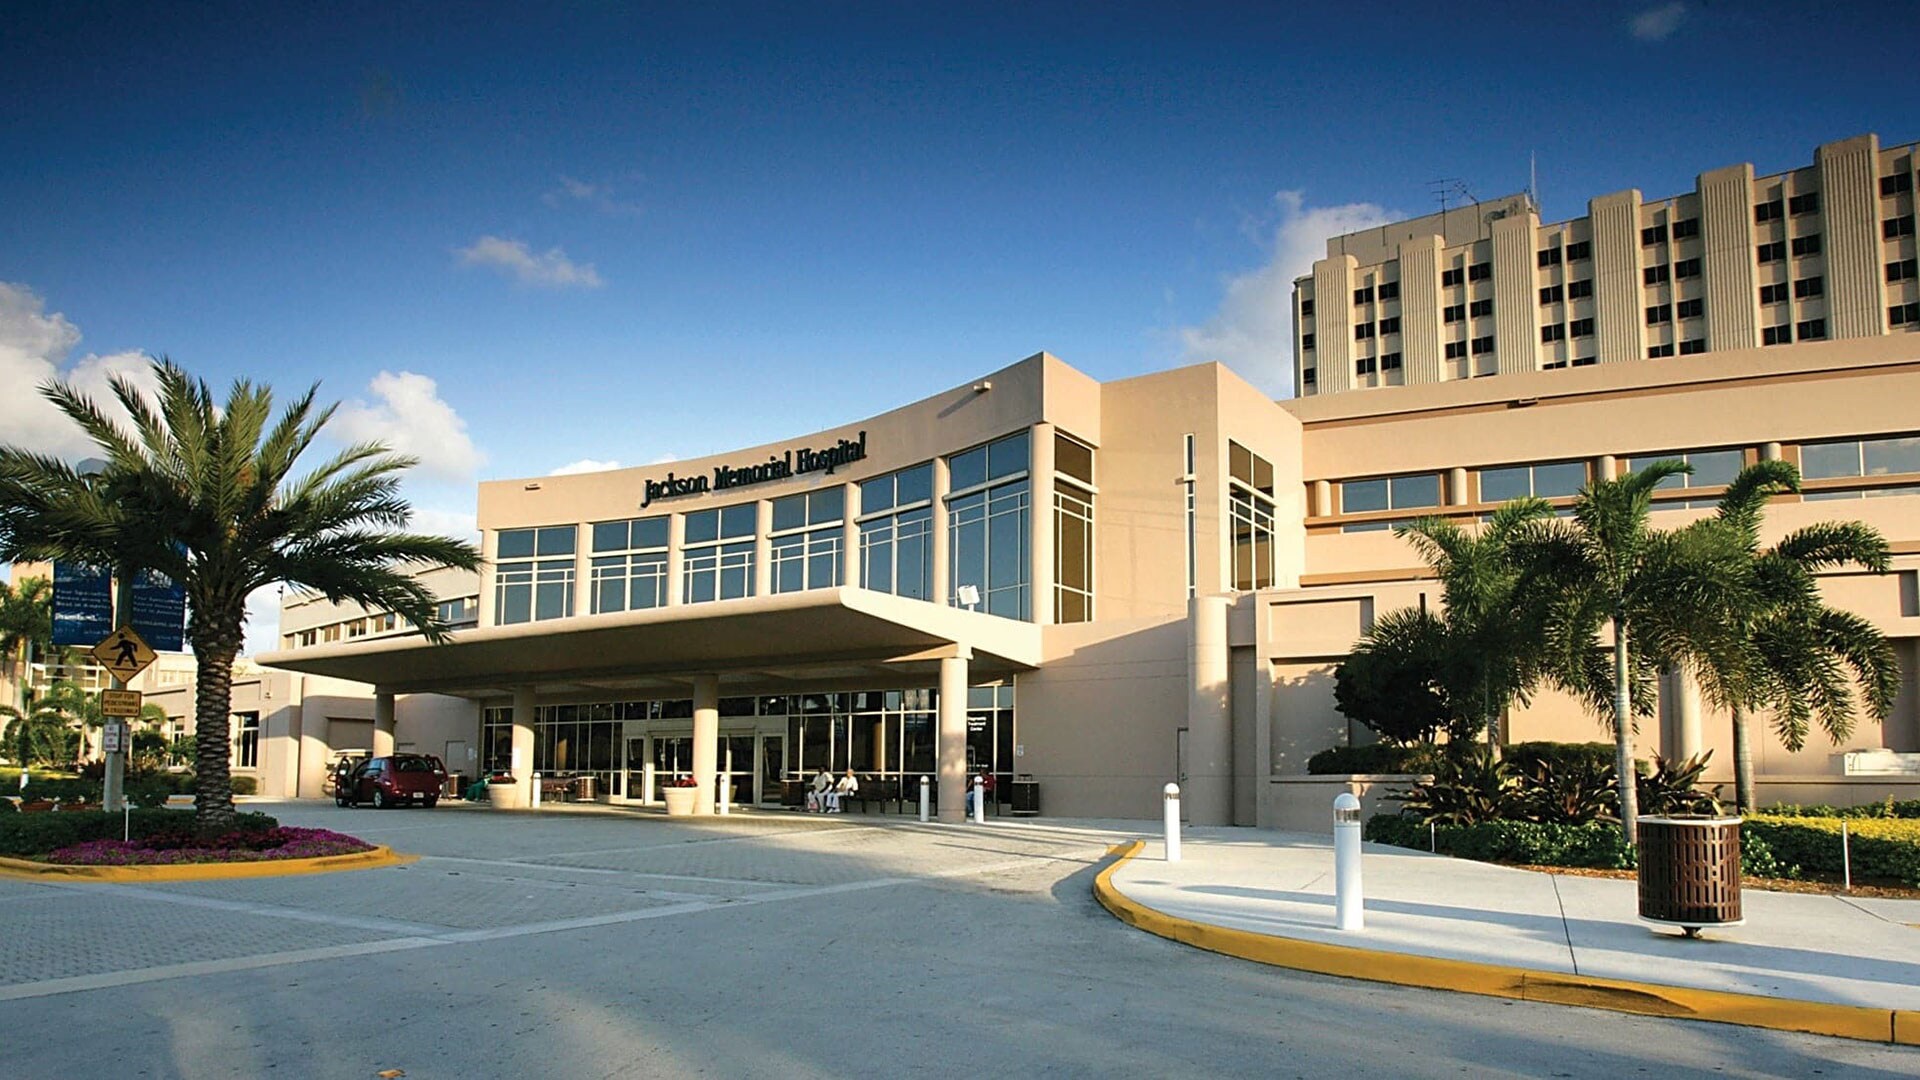 Download image (.jpg) Jackson Health System in Miami, Florida (opens in a new window)